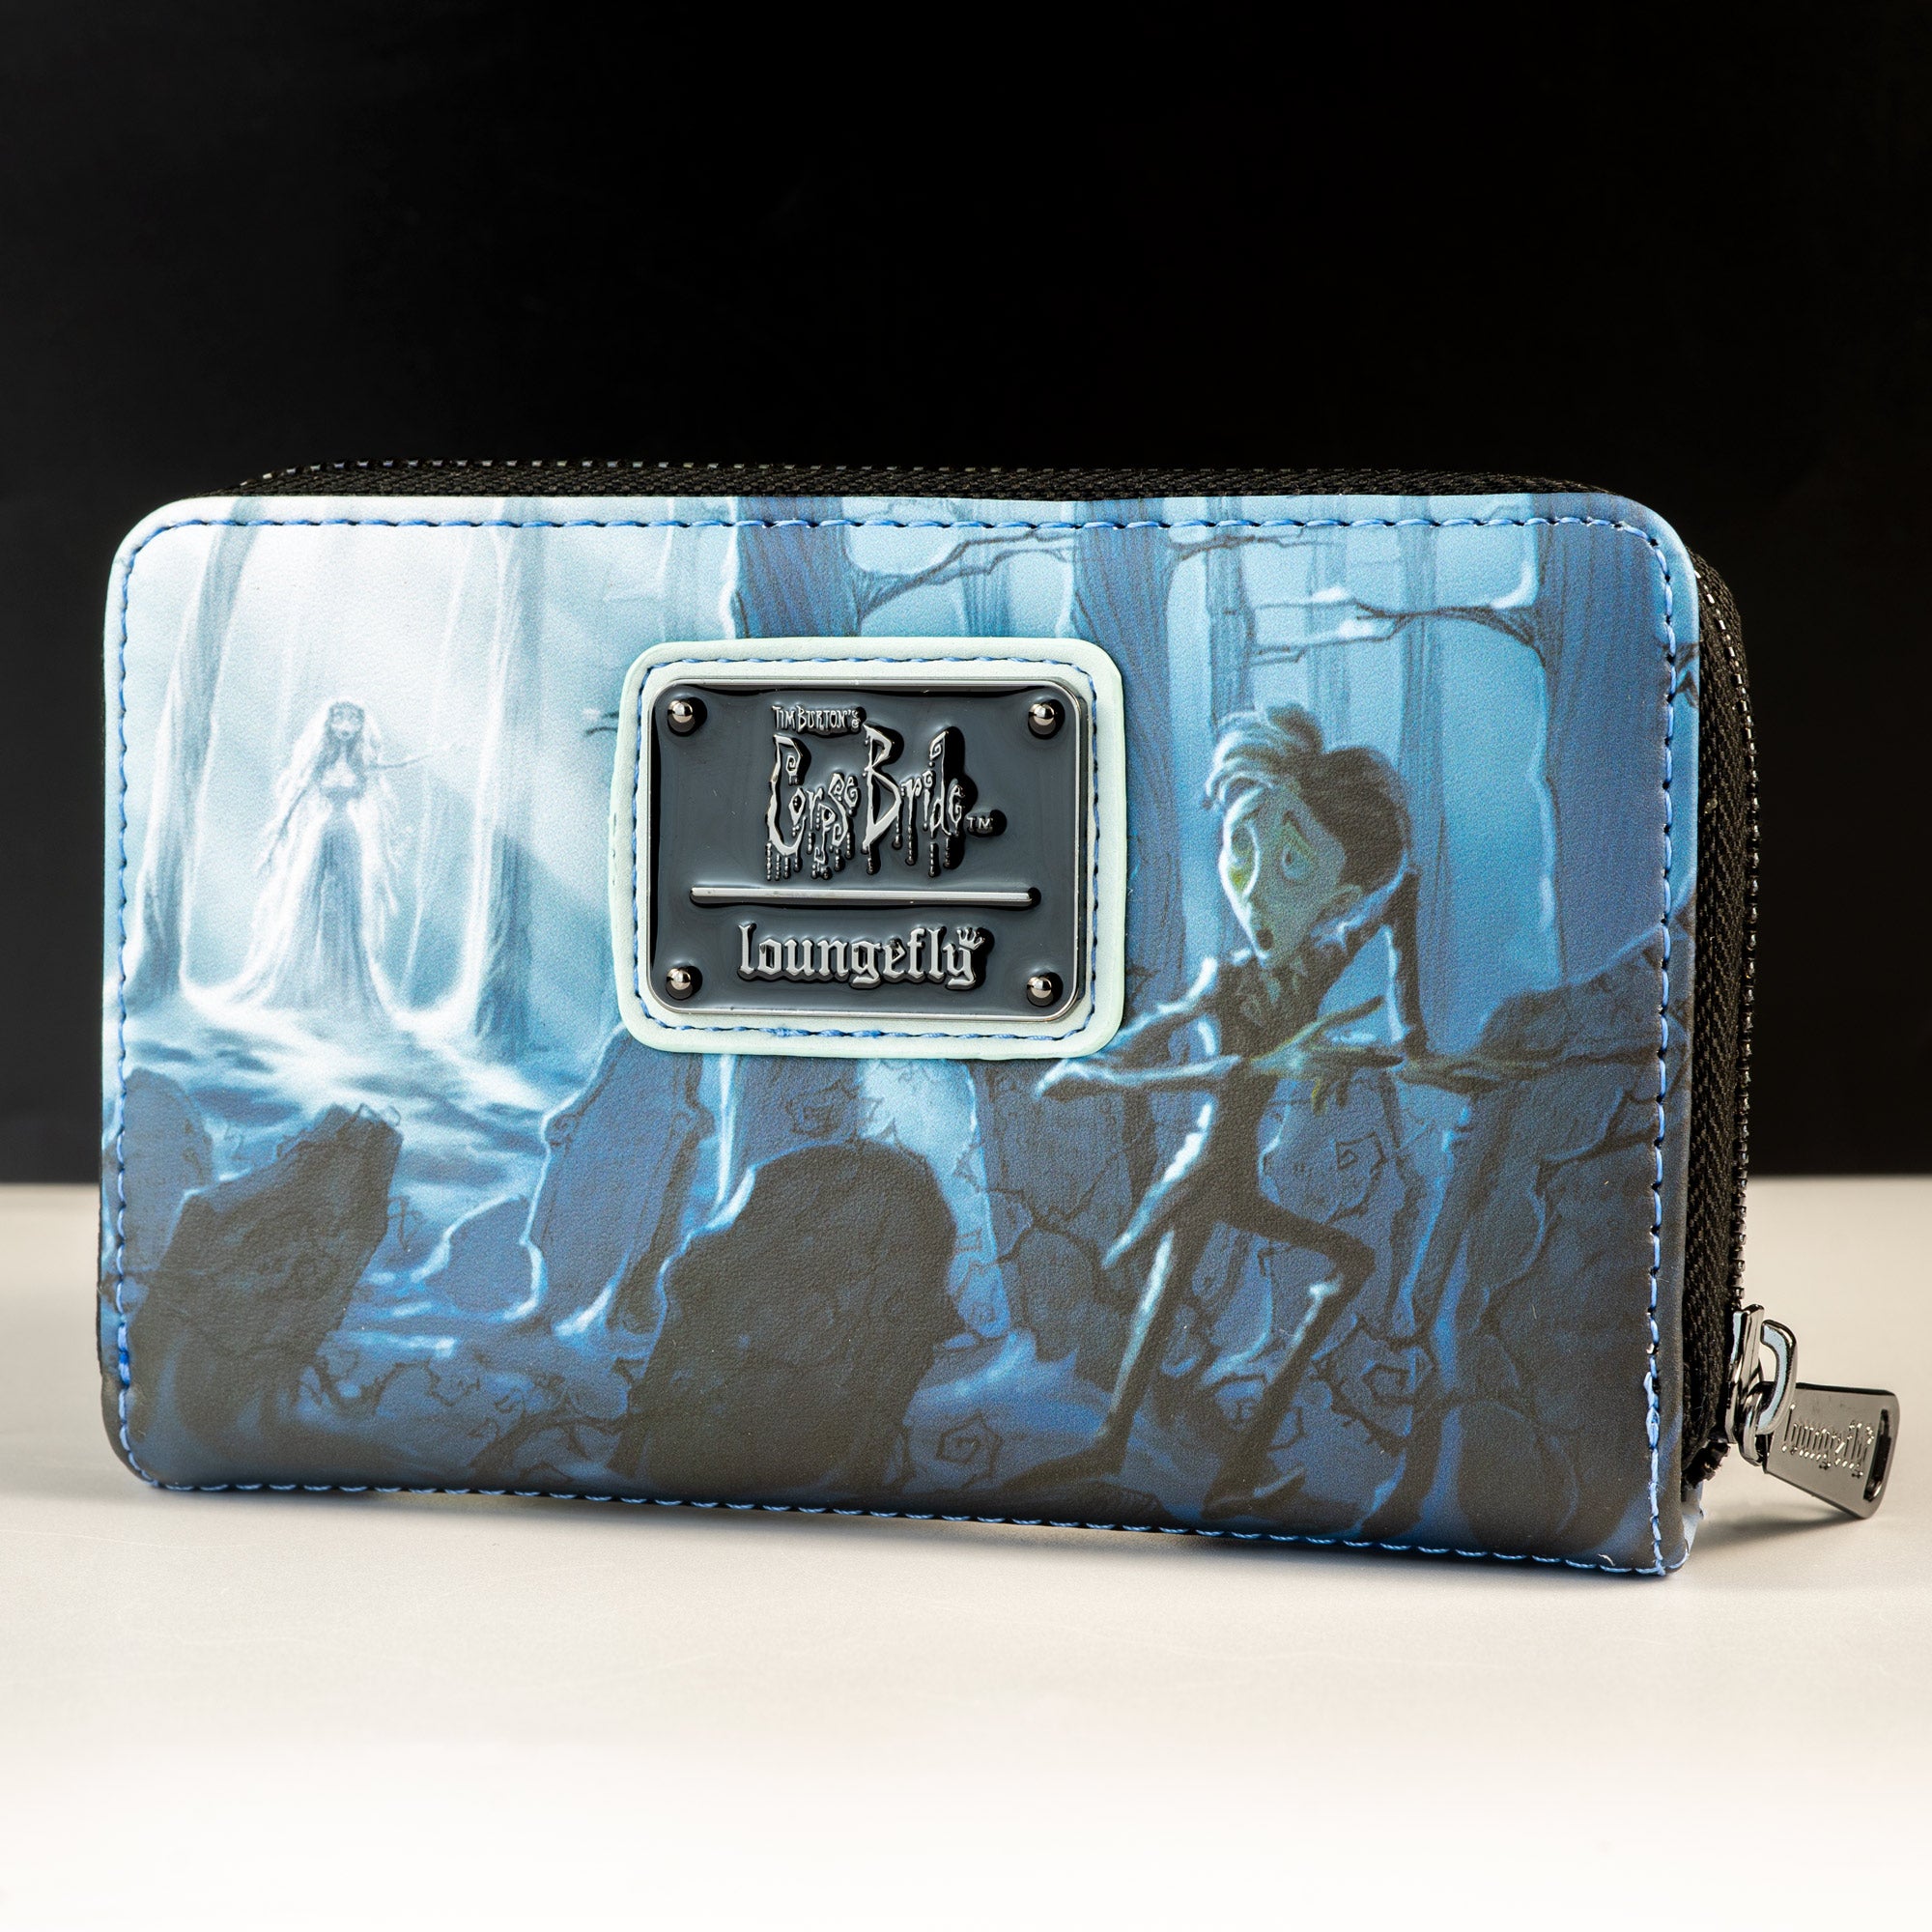 Loungefly x Corpse Bride Emily Forest Wallet